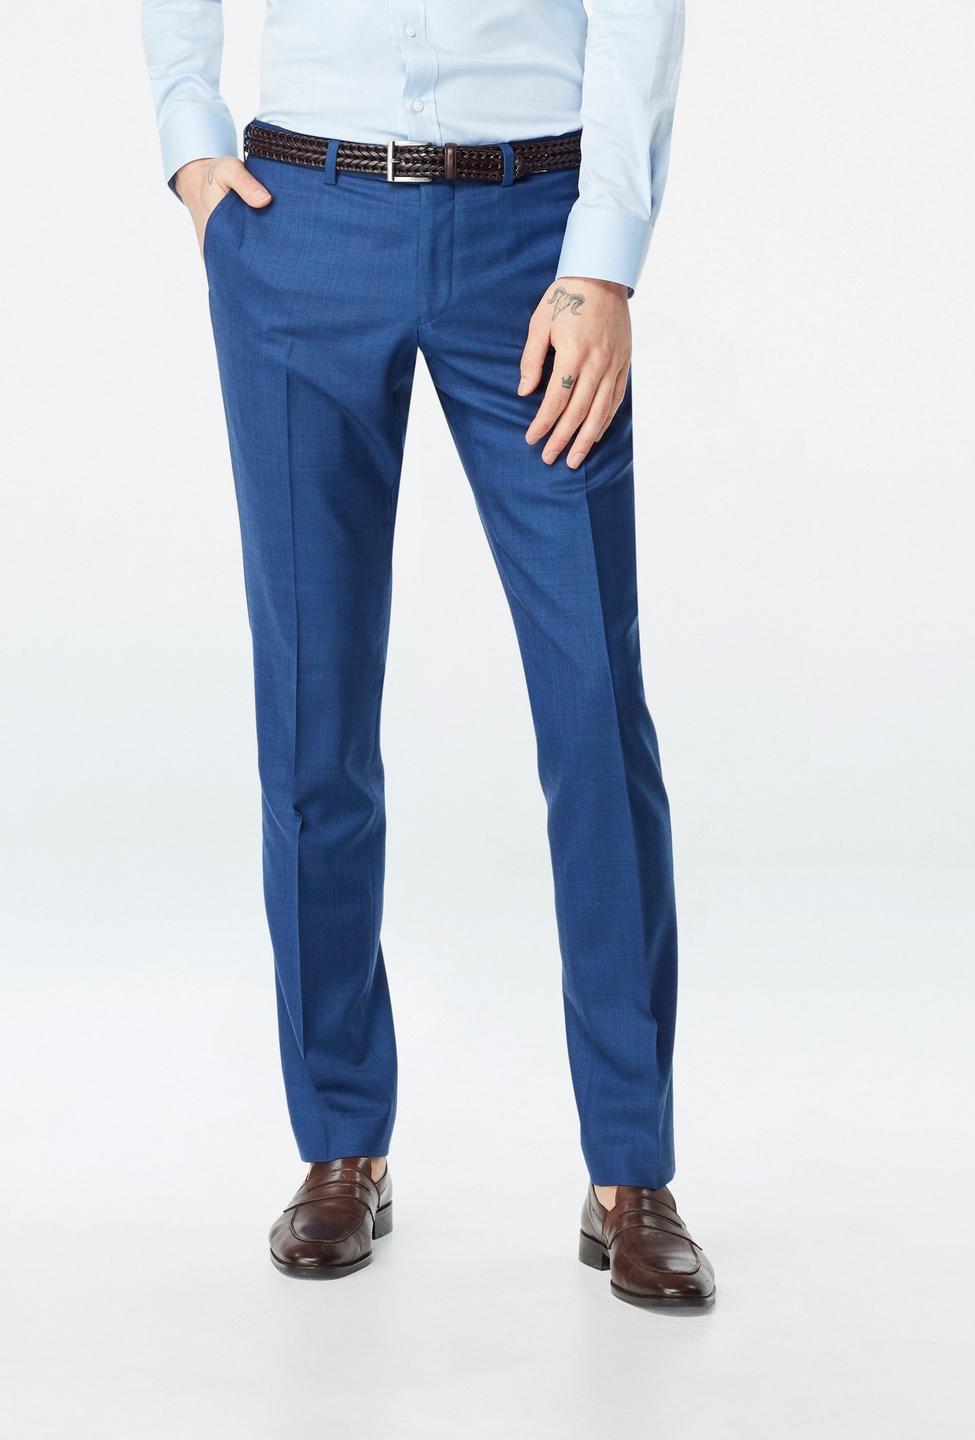 Blue pants - Hayle Solid Design from Premium Indochino Collection